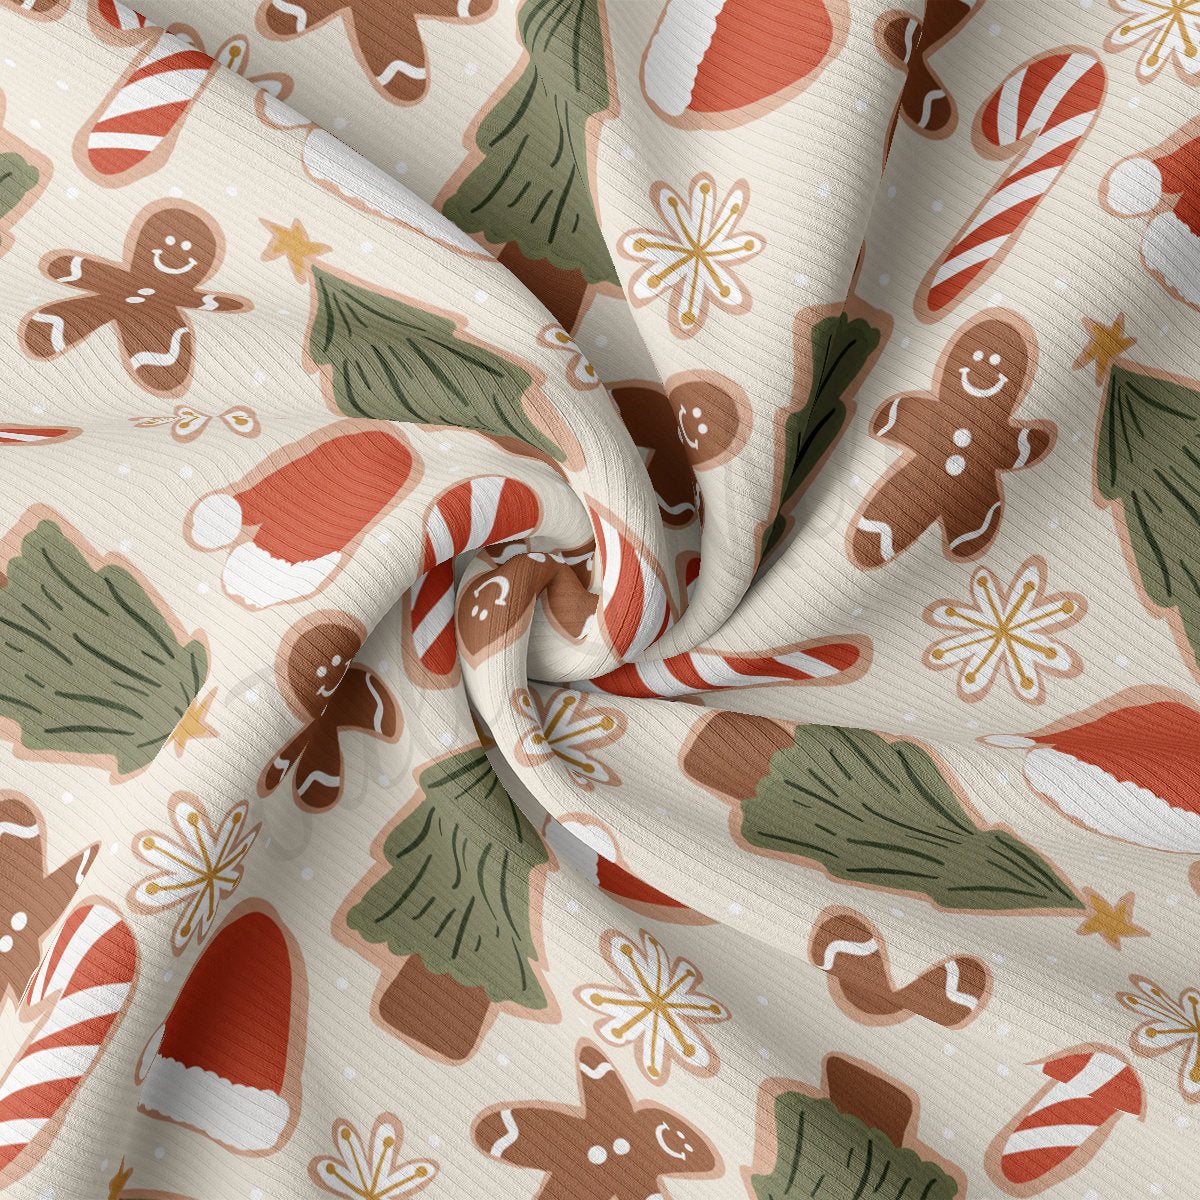 Rib Knit Fabric by the Yard Ribbed Jersey Stretchy Soft Polyester Stretch Fabric 1 Yard  RBK2098 Christmas